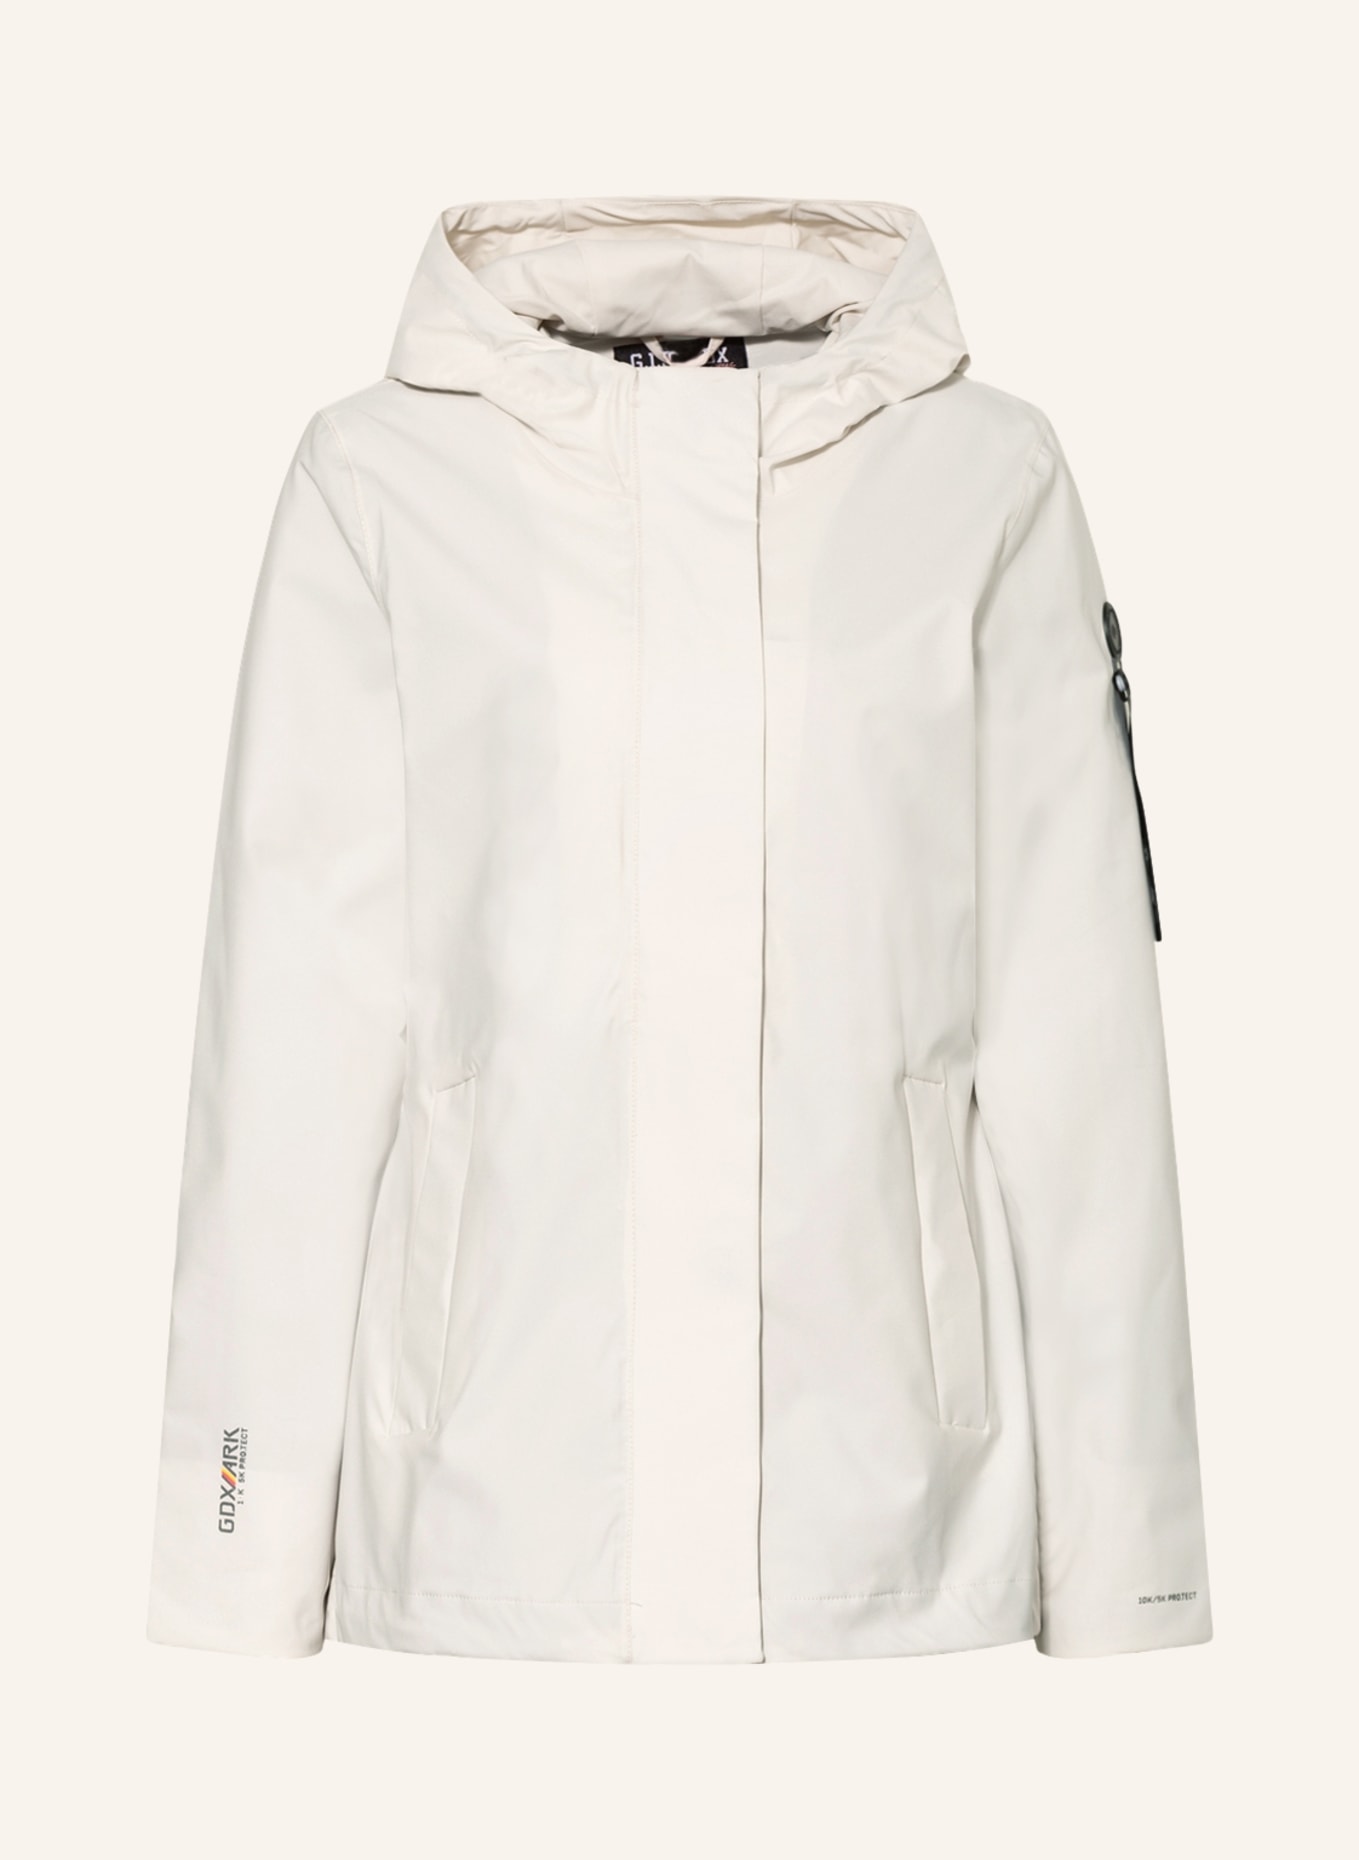 cream Outdoor by killtec G.I.G.A. in 152 jacket DX GS